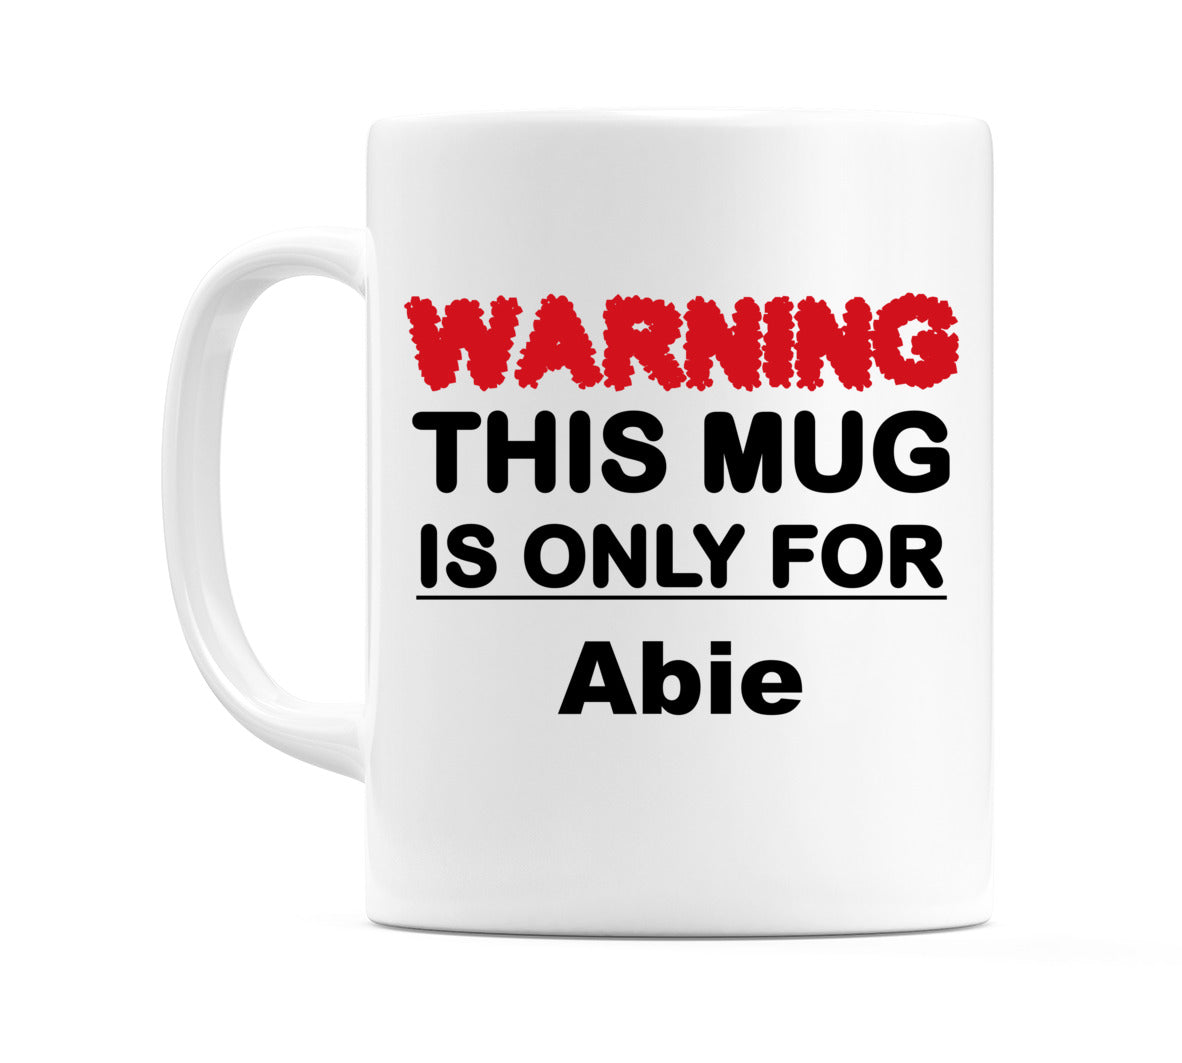 Warning This Mug is ONLY for Abie Mug